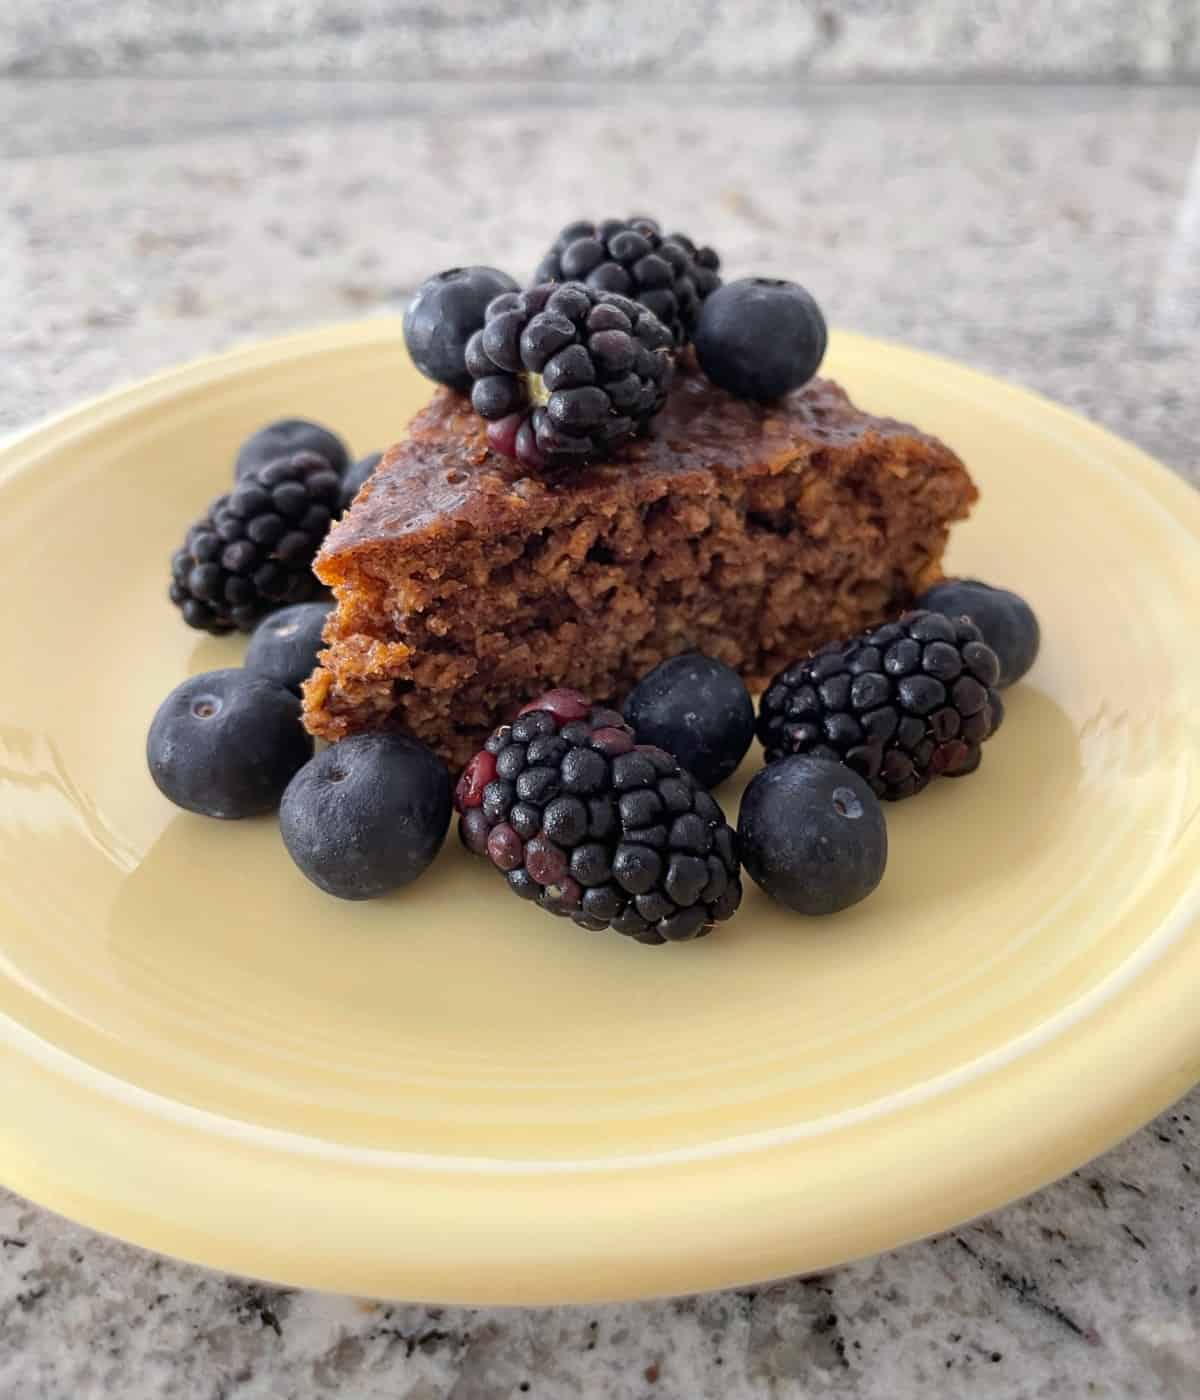 Piece of flourless banana oat cake topped with blueberries and blackberries on yellow plate.